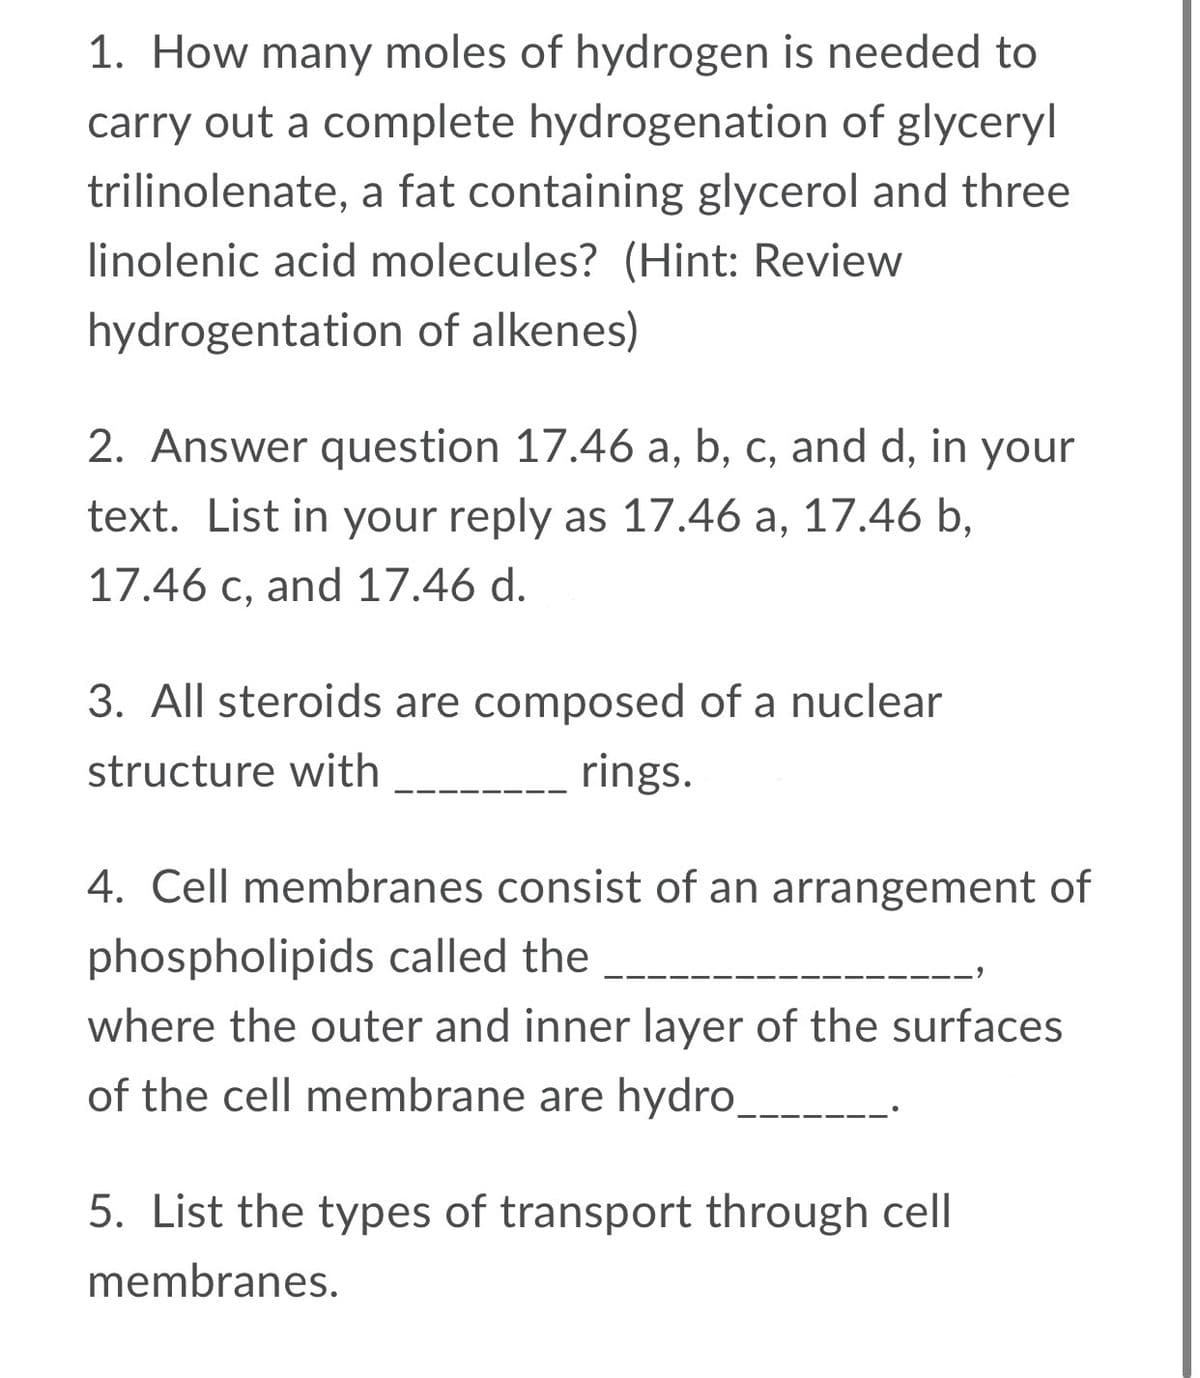 1. How many moles of hydrogen is needed to
carry out a complete hydrogenation of glyceryl
trilinolenate, a fat containing glycerol and three
linolenic acid molecules? (Hint: Review
hydrogentation of alkenes)
2. Answer question 17.46 a, b, c, and d, in your
text. List in your reply as 17.46 a, 17.46 b,
17.46 c, and 17.46 d.
3. All steroids are composed of a nuclear
structure with
rings.
4. Cell membranes consist of an arrangement of
phospholipids called the
where the outer and inner layer of the surfaces
of the cell membrane are hydro_
5. List the types of transport through cell
membranes.
